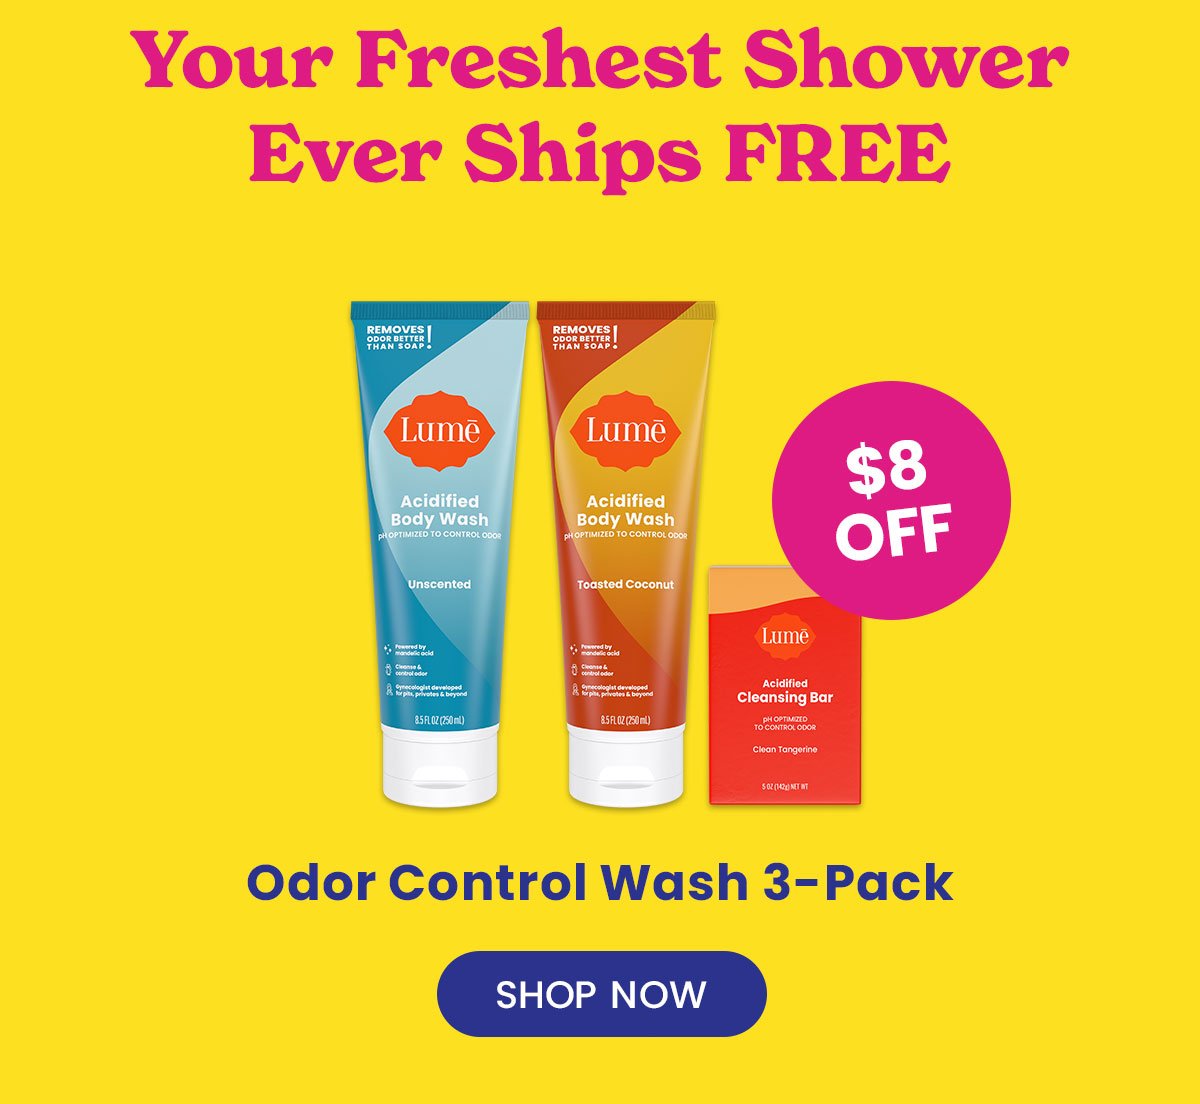 Your Freshest Shower Ever Ships FREE